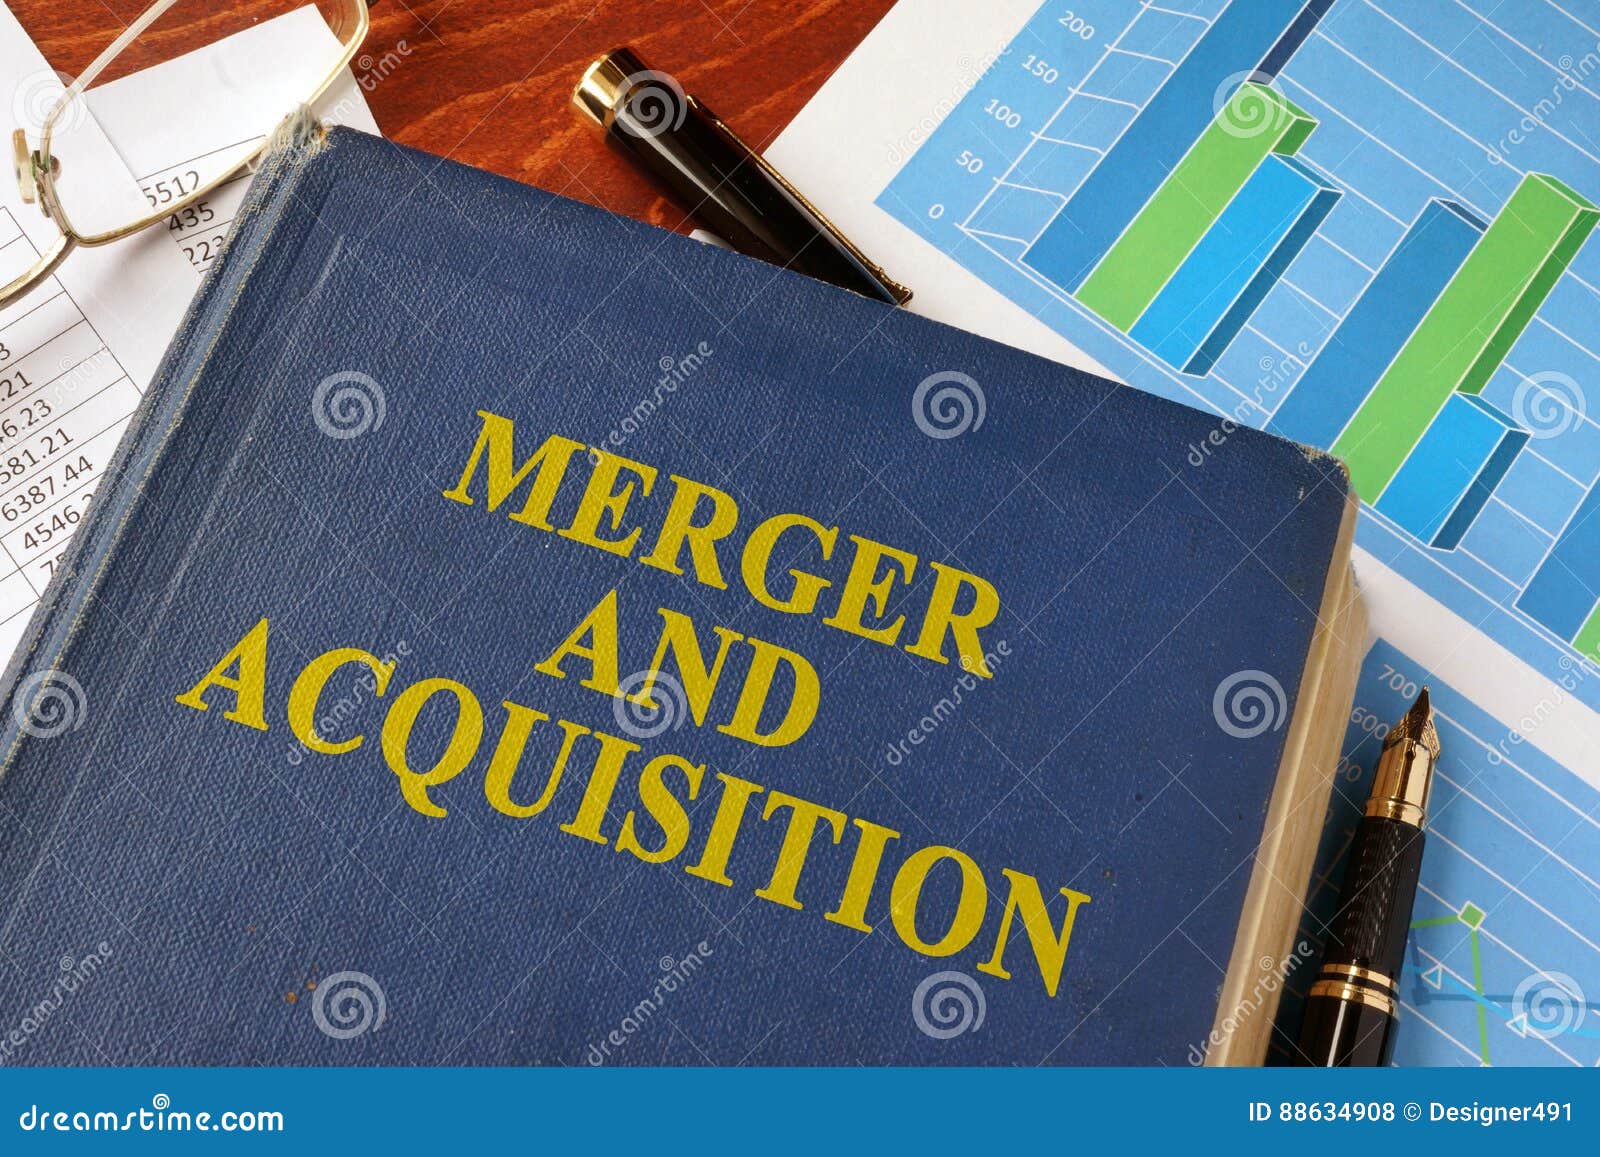 book with title merger and acquisition.